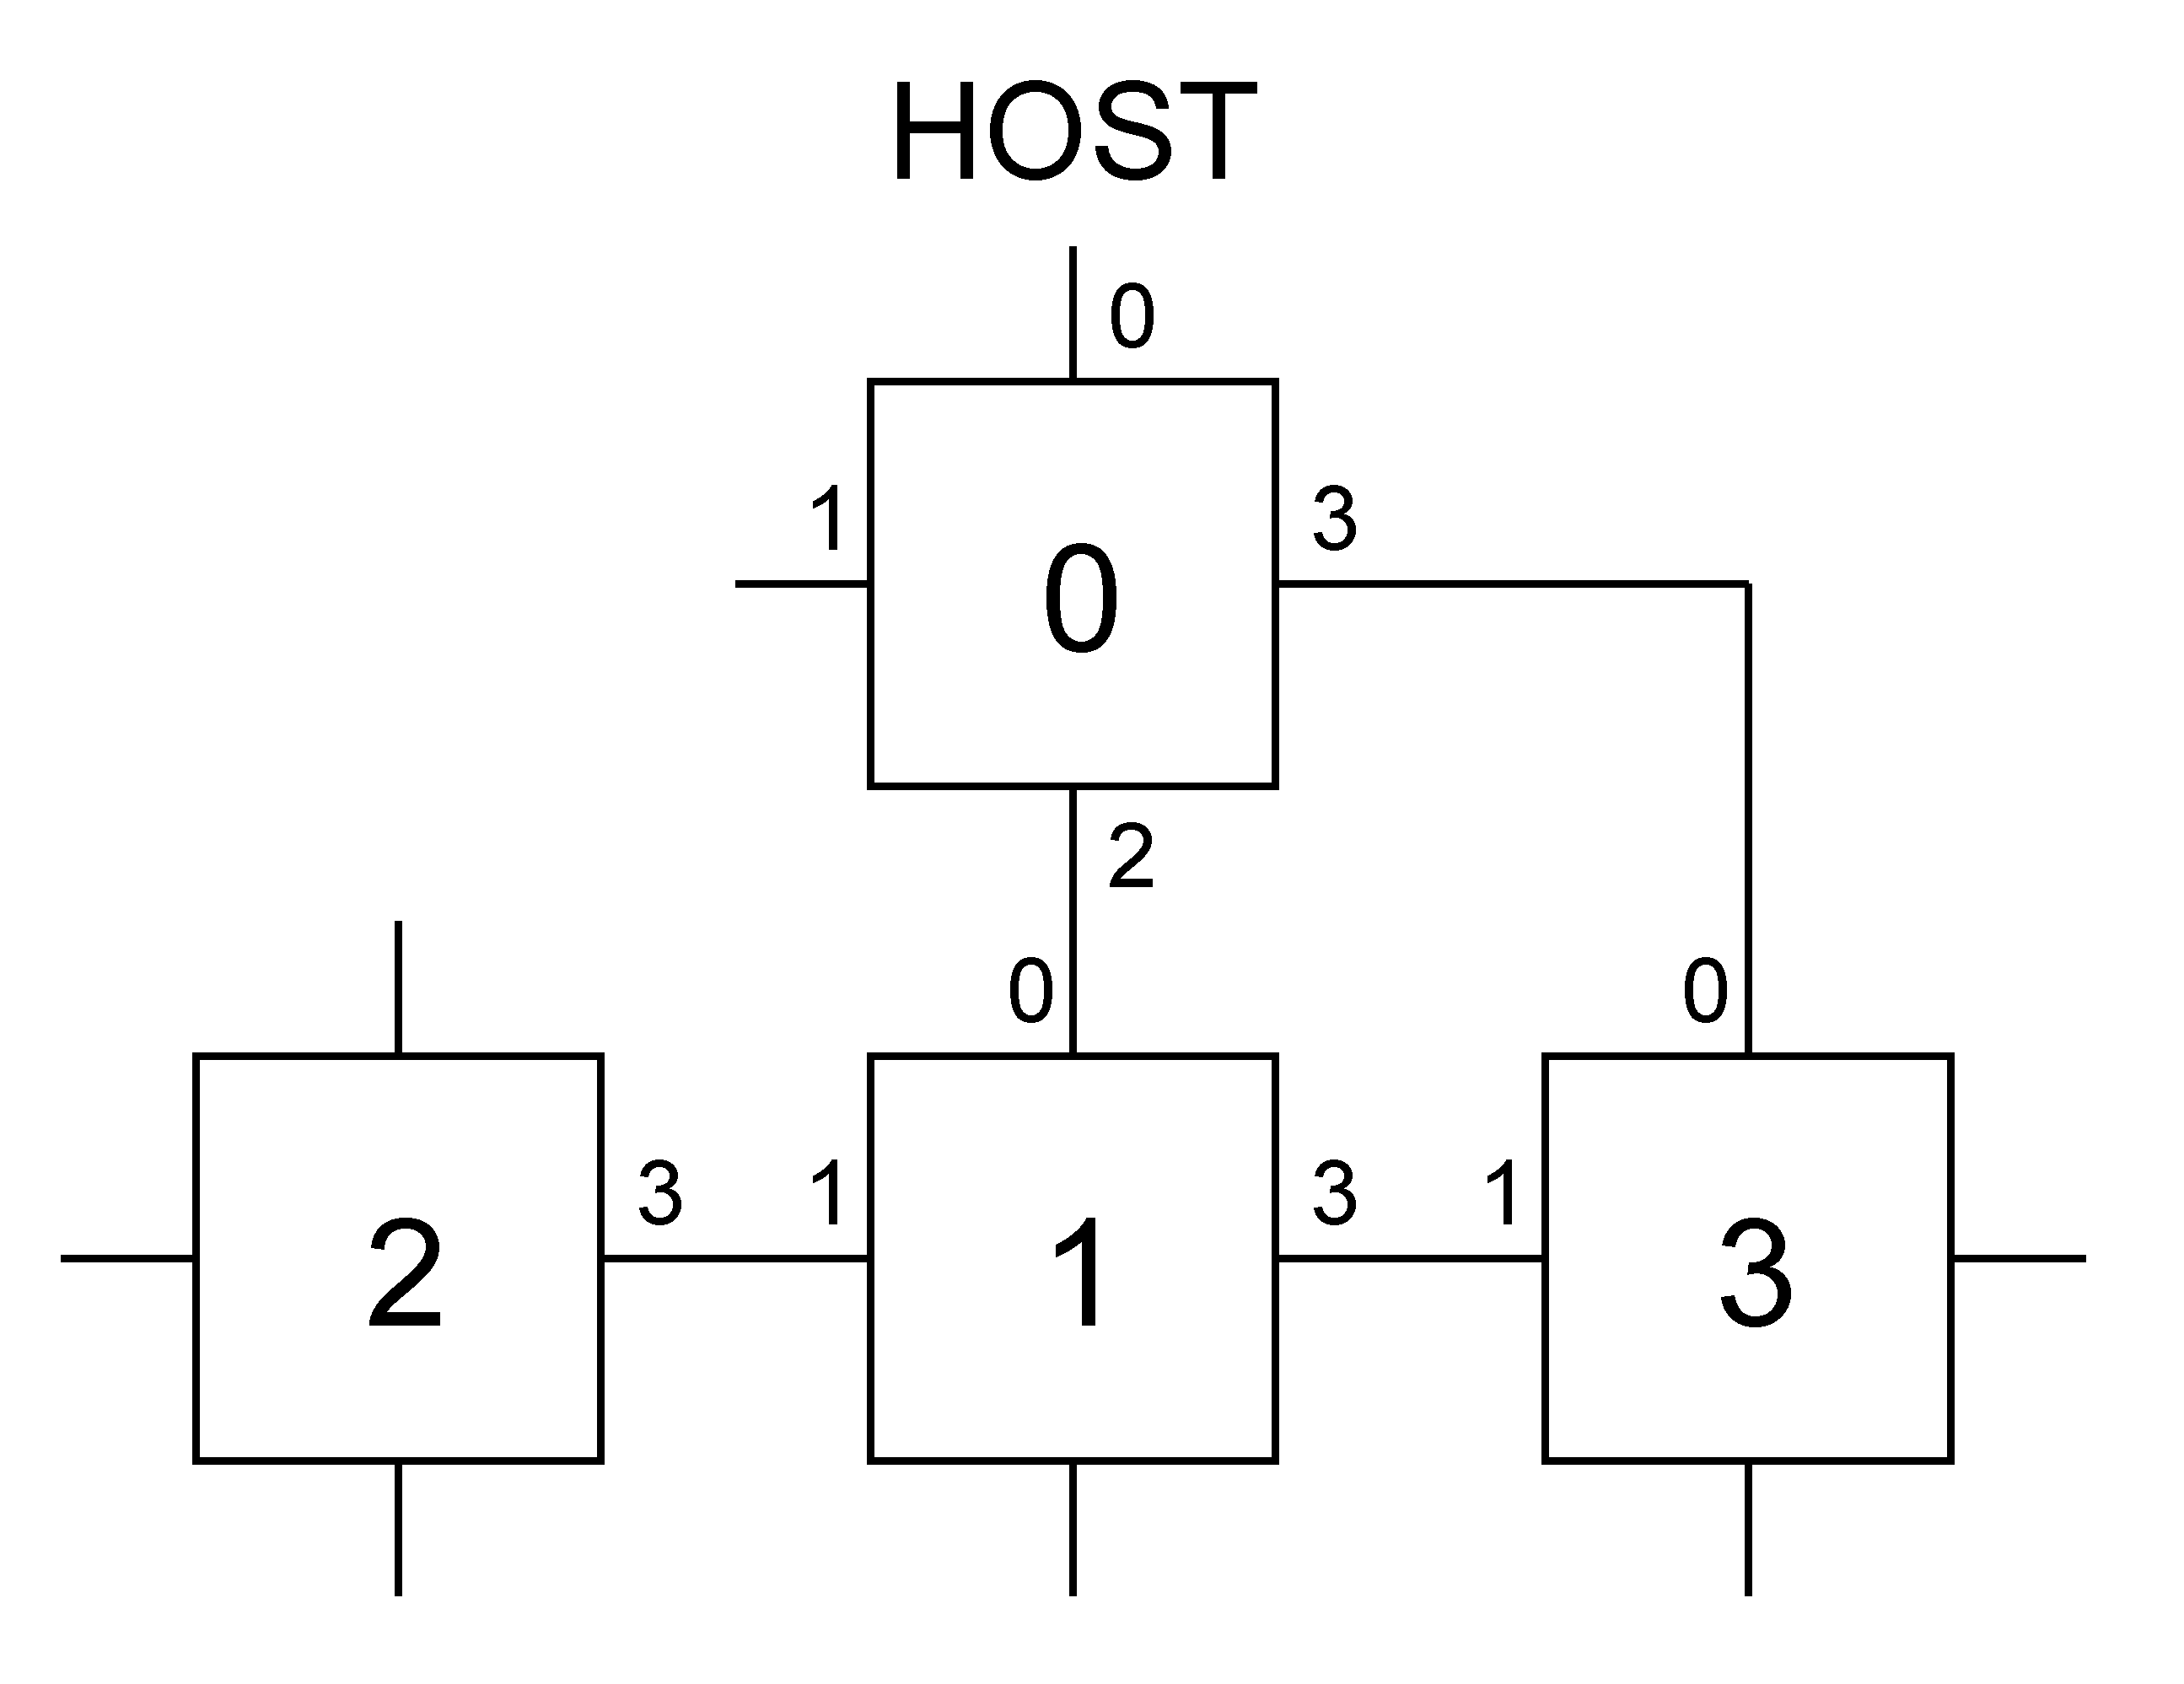 A simple network